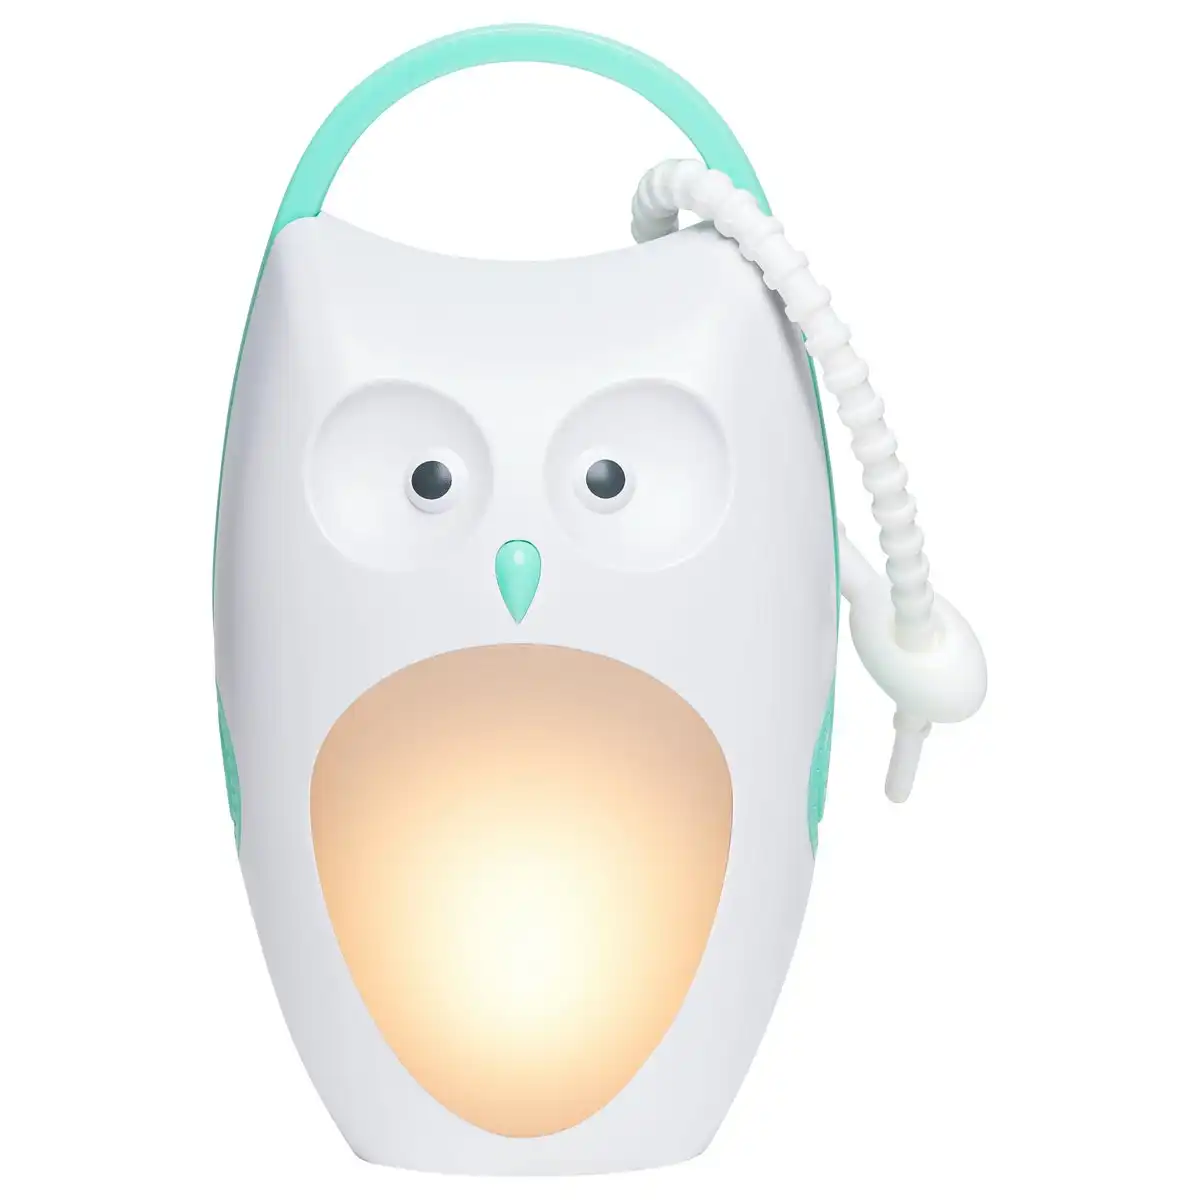 Oricom OLS50 Portable Baby Sound Soother with Night Light